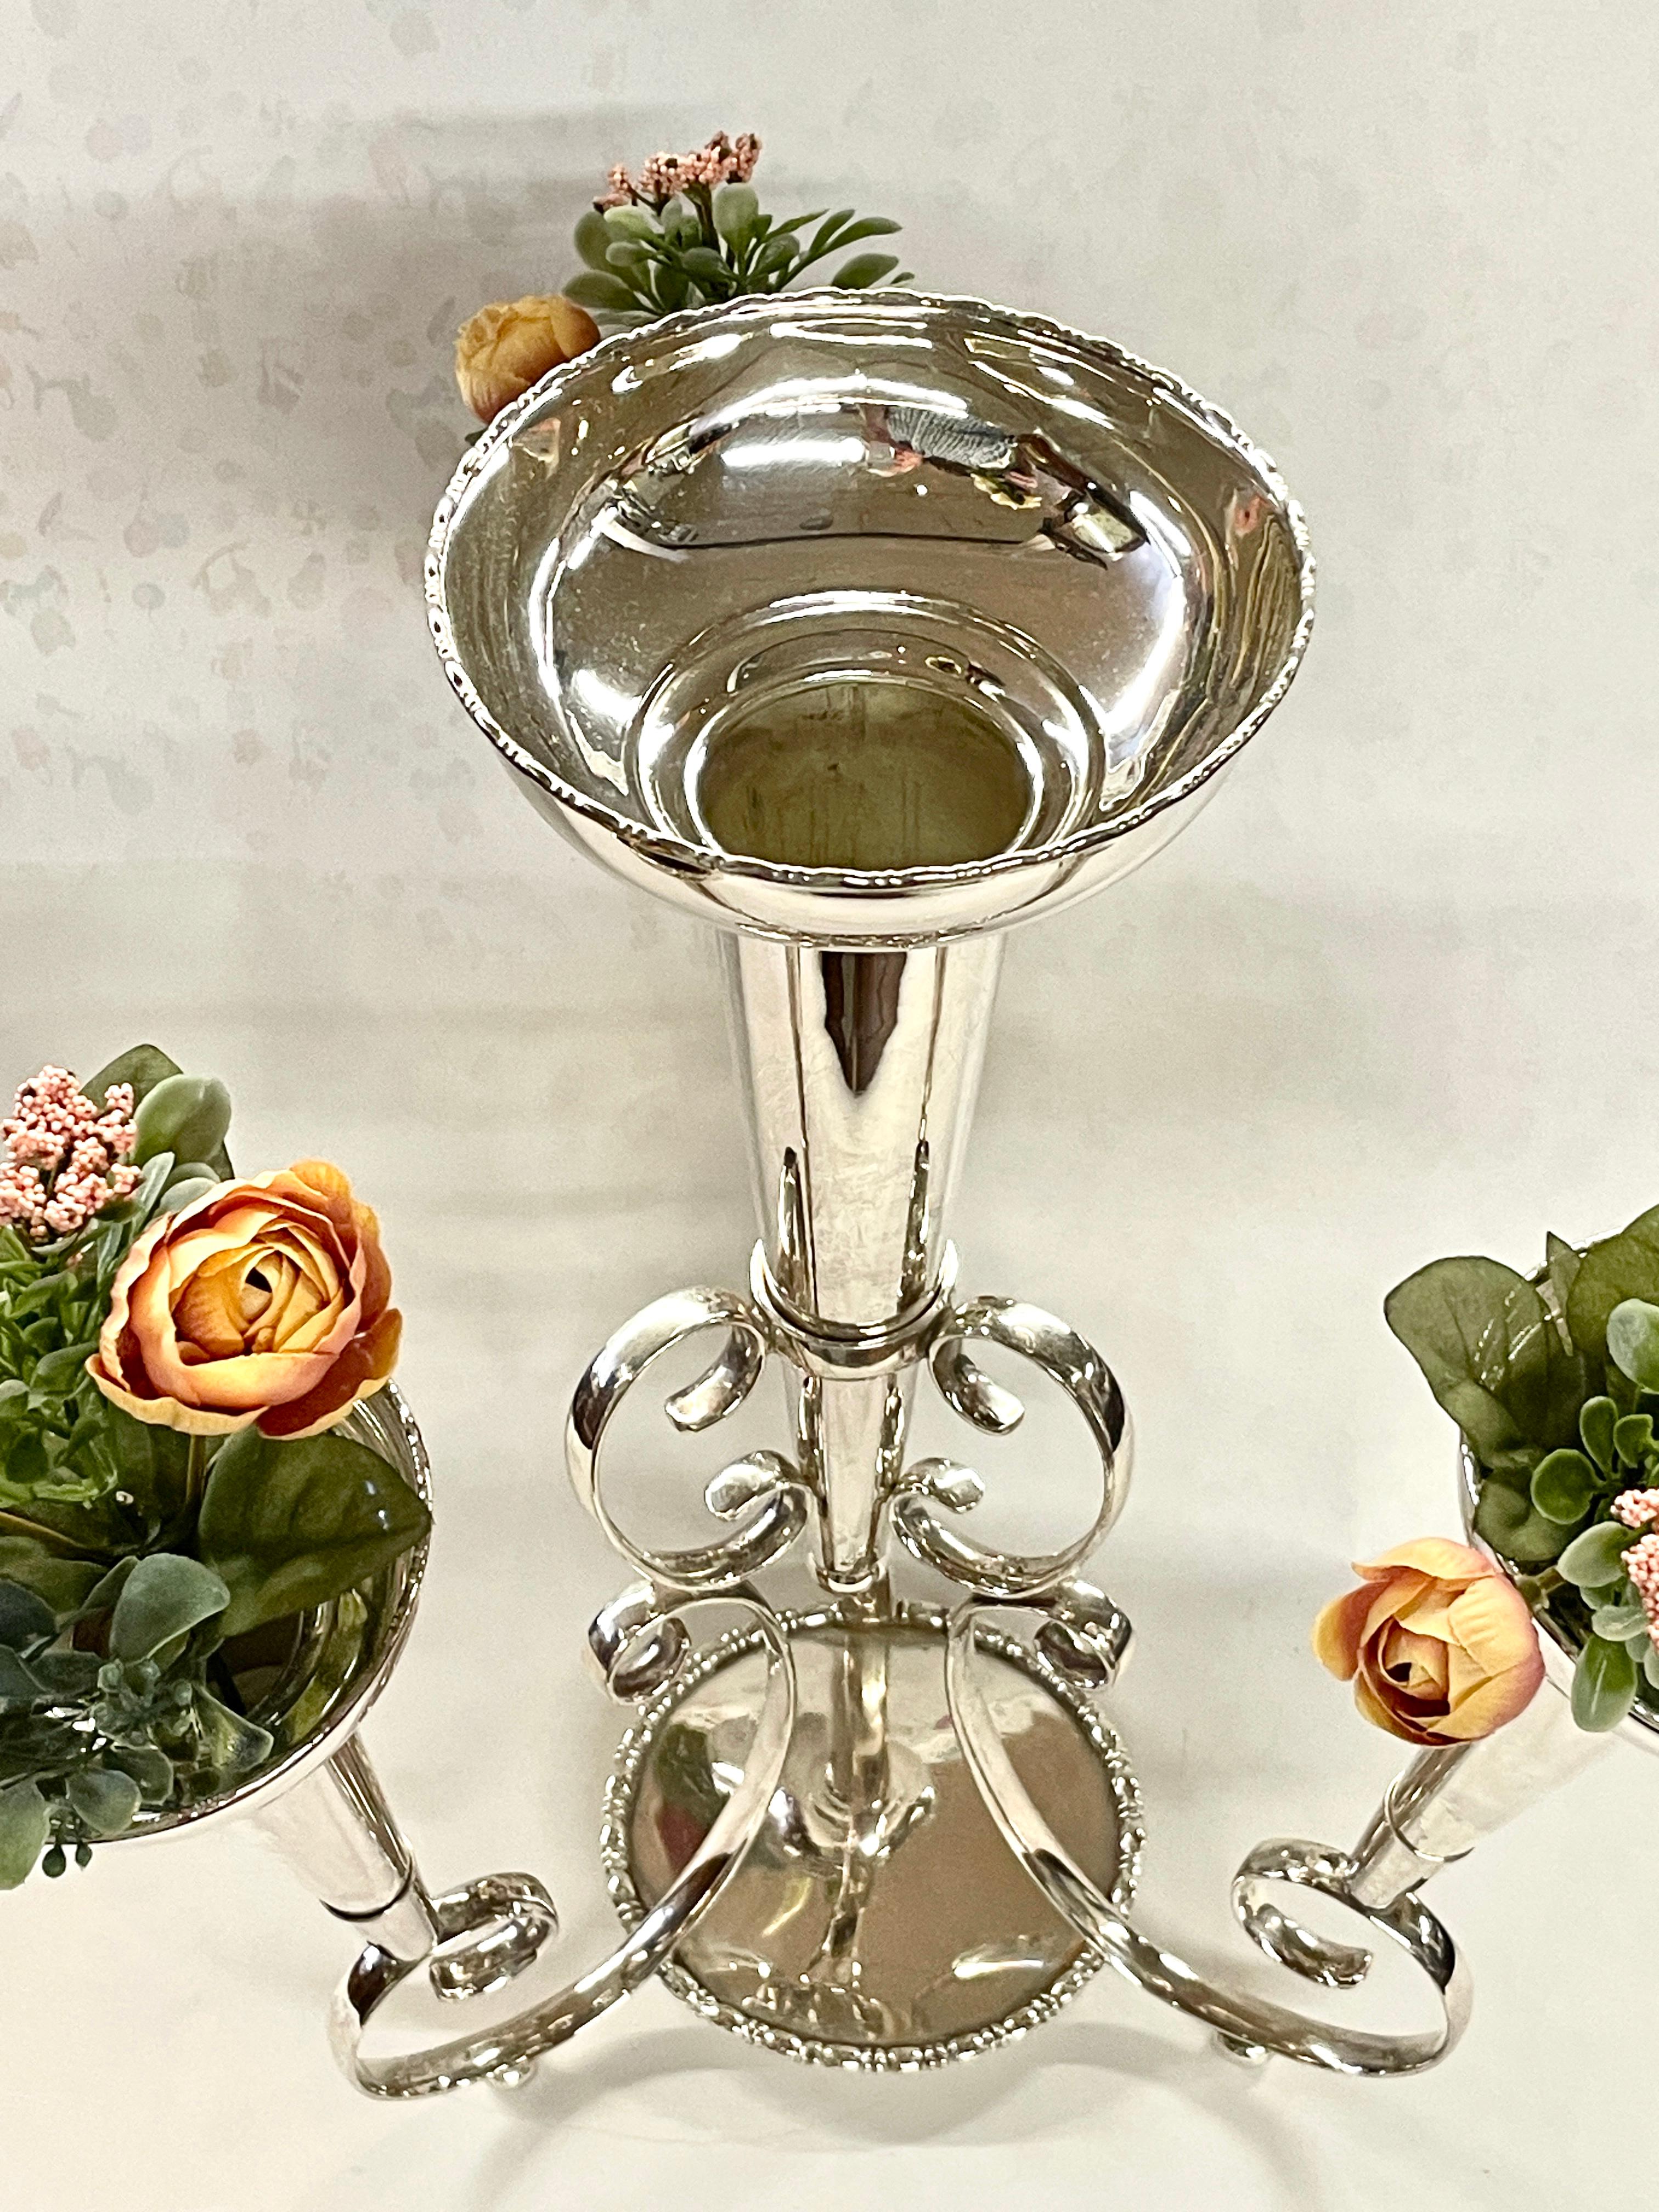 Superb Antique English Sheffield Silver Plate 4-Tube Floral Epergne Centerpiece In Good Condition For Sale In Charleston, SC